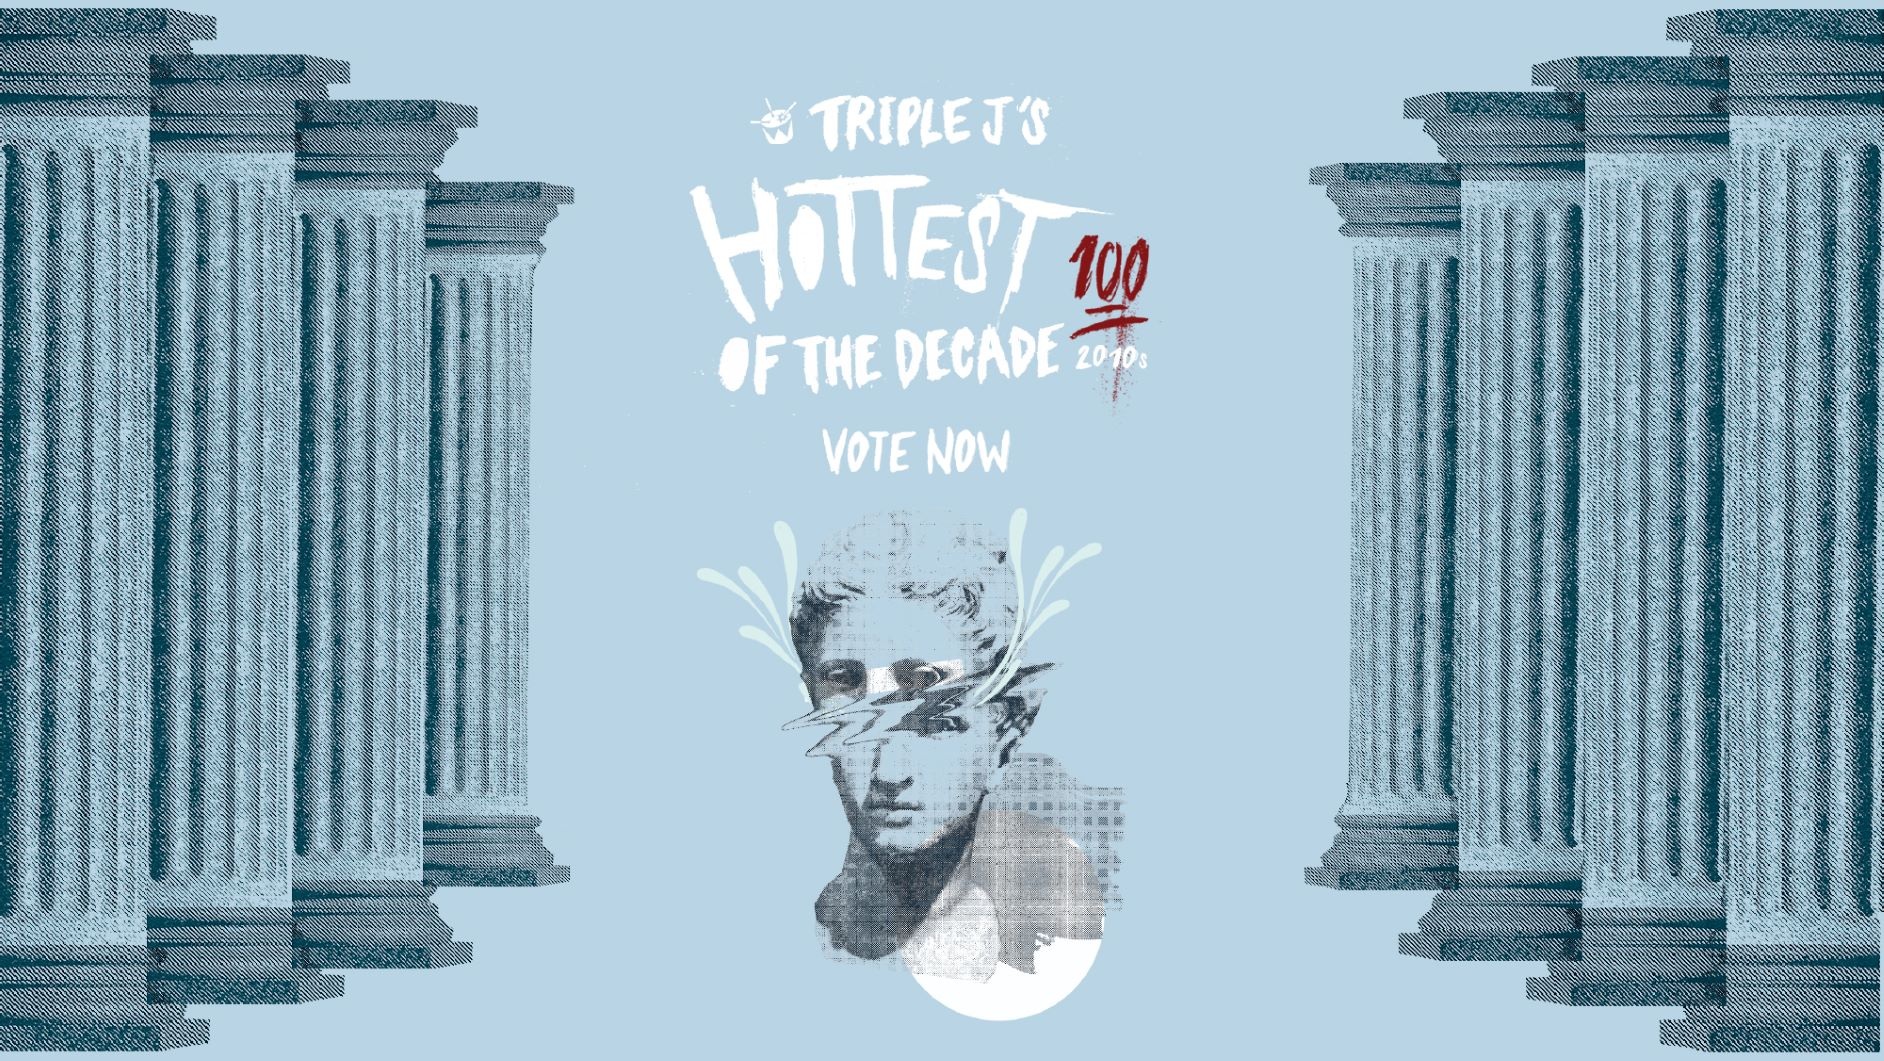 triple-j-opens-voting-for-the-hottest-100-of-the-decade-can-we-right